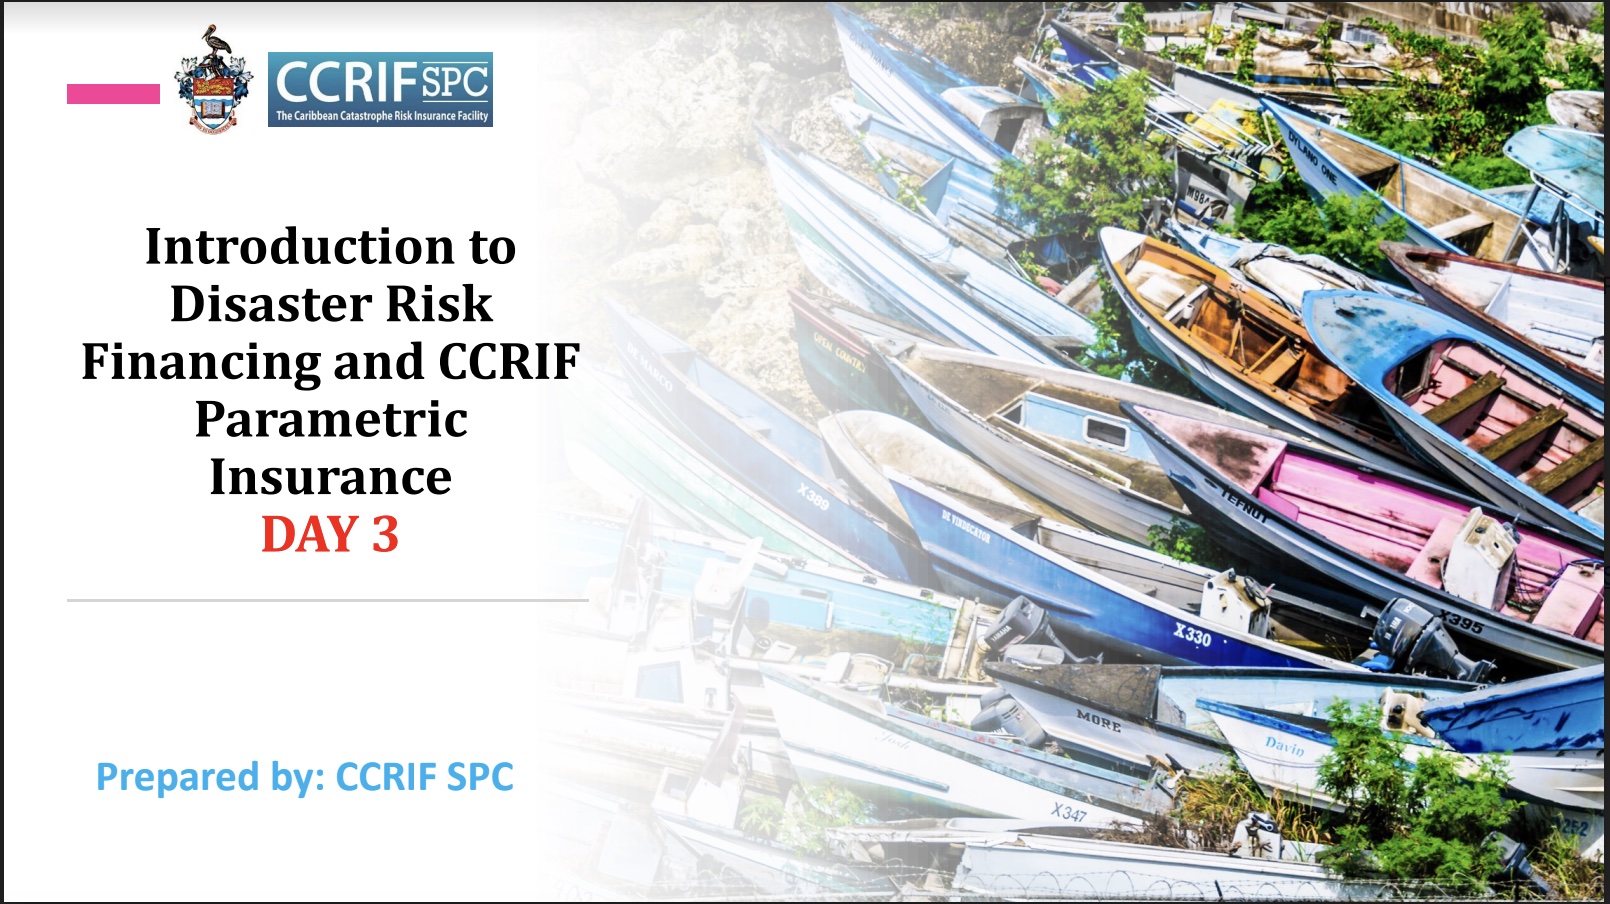 Day 3 - Presentation - Introduction to Disaster Risk Financing and CCRIF Parametric Insurance